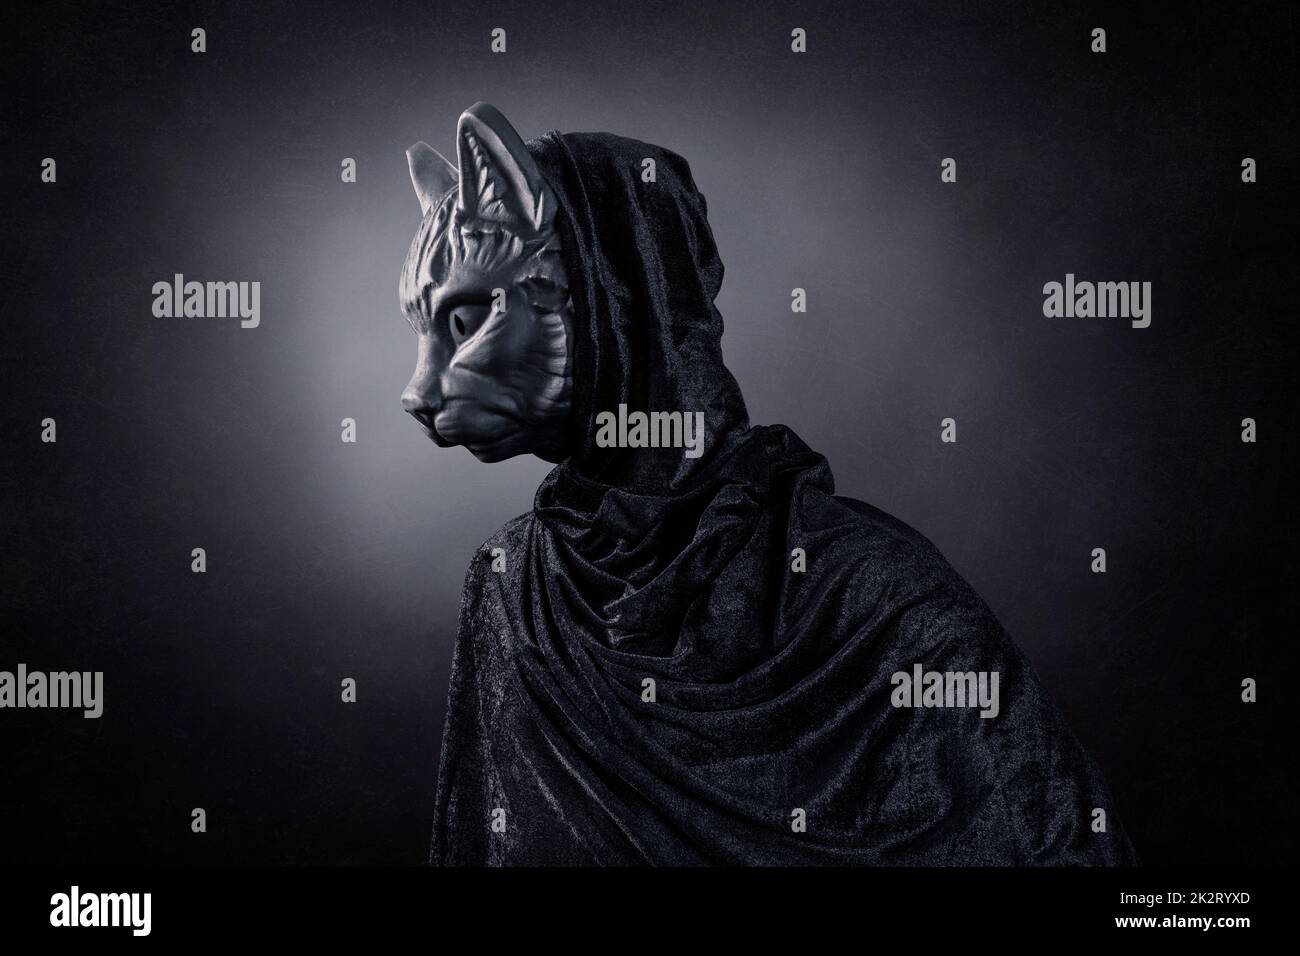 Black cat in hooded cloak at night over dark misty background Stock Photo